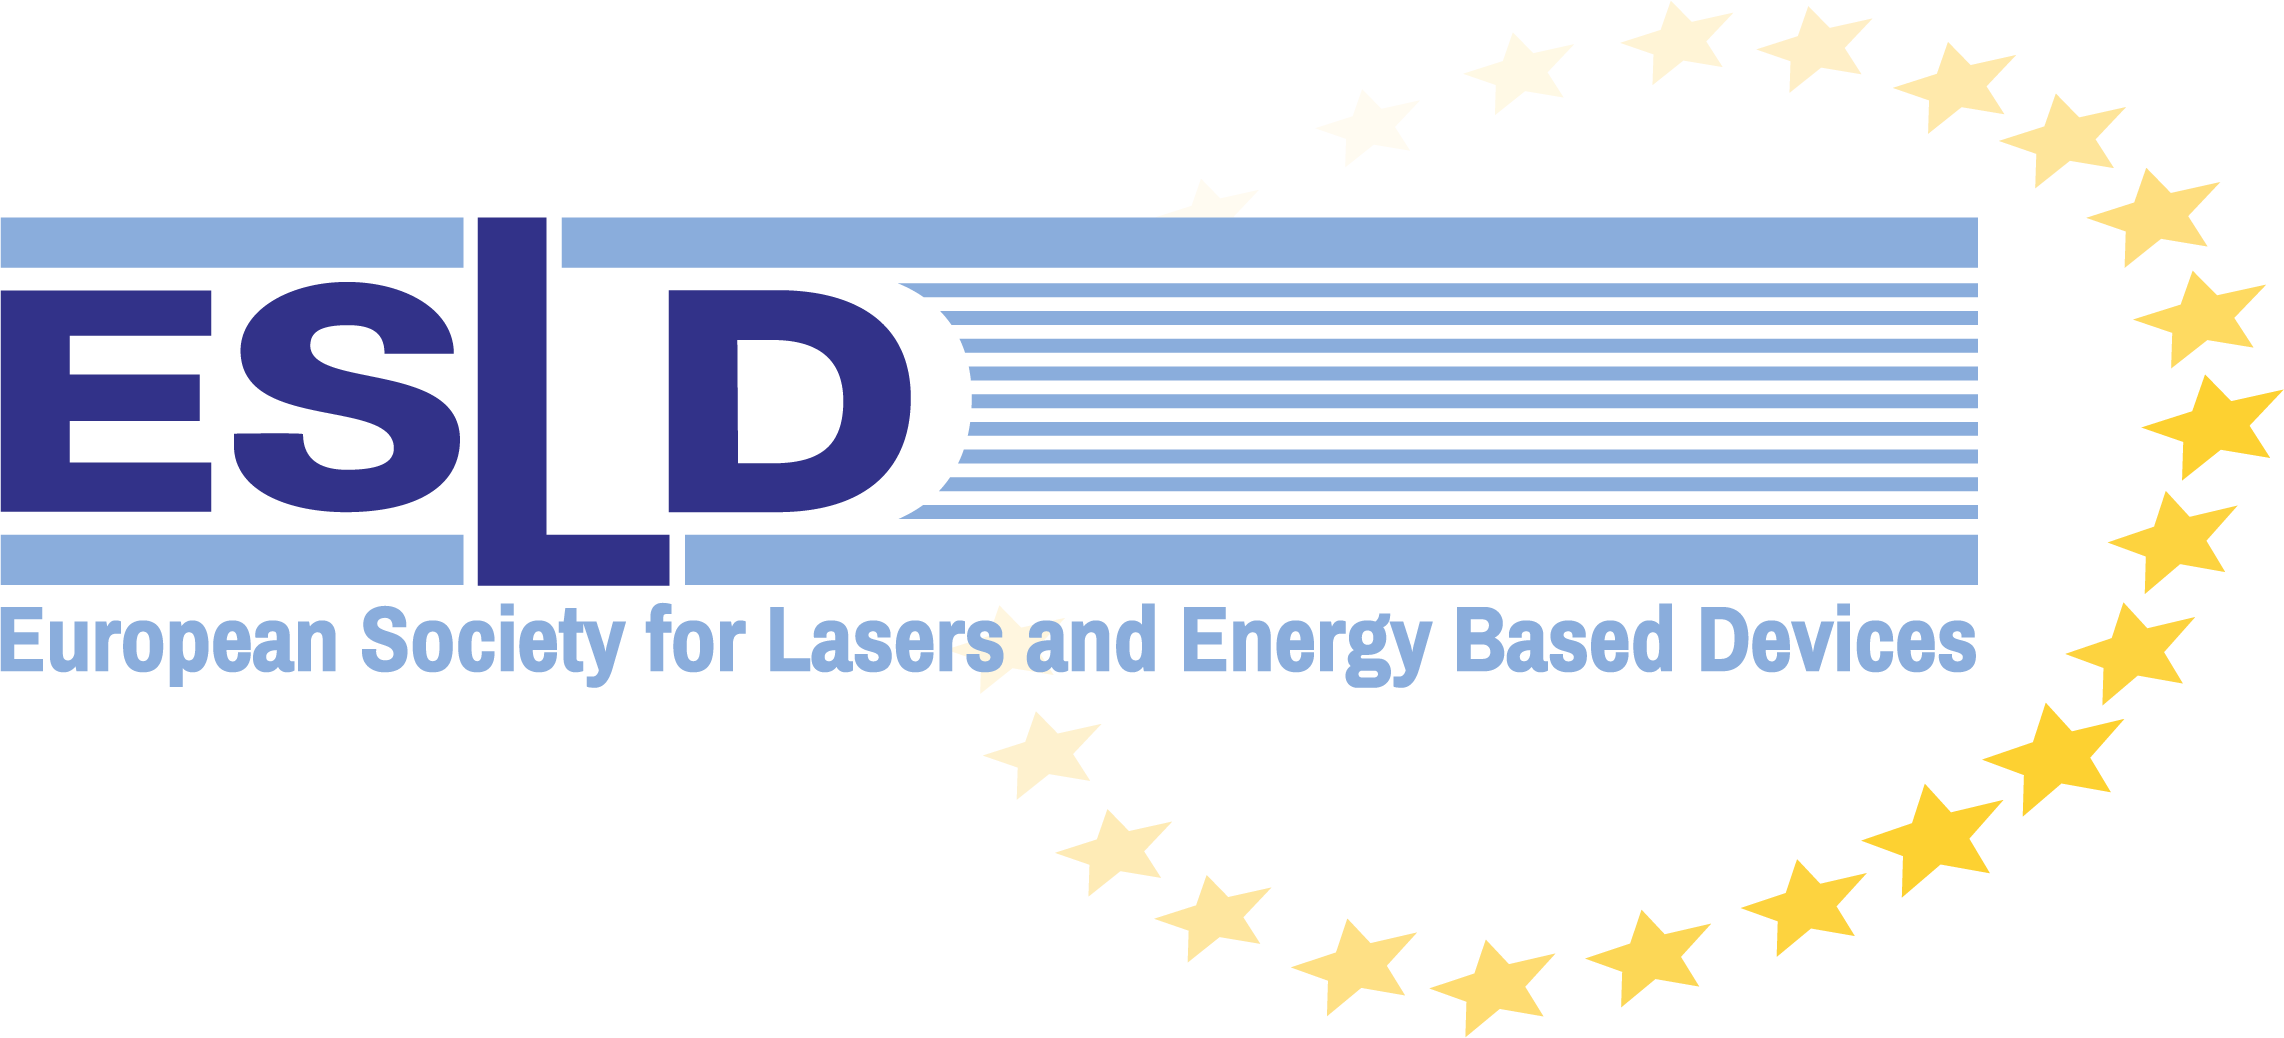 European Society for Lasers and Energy Based Devices